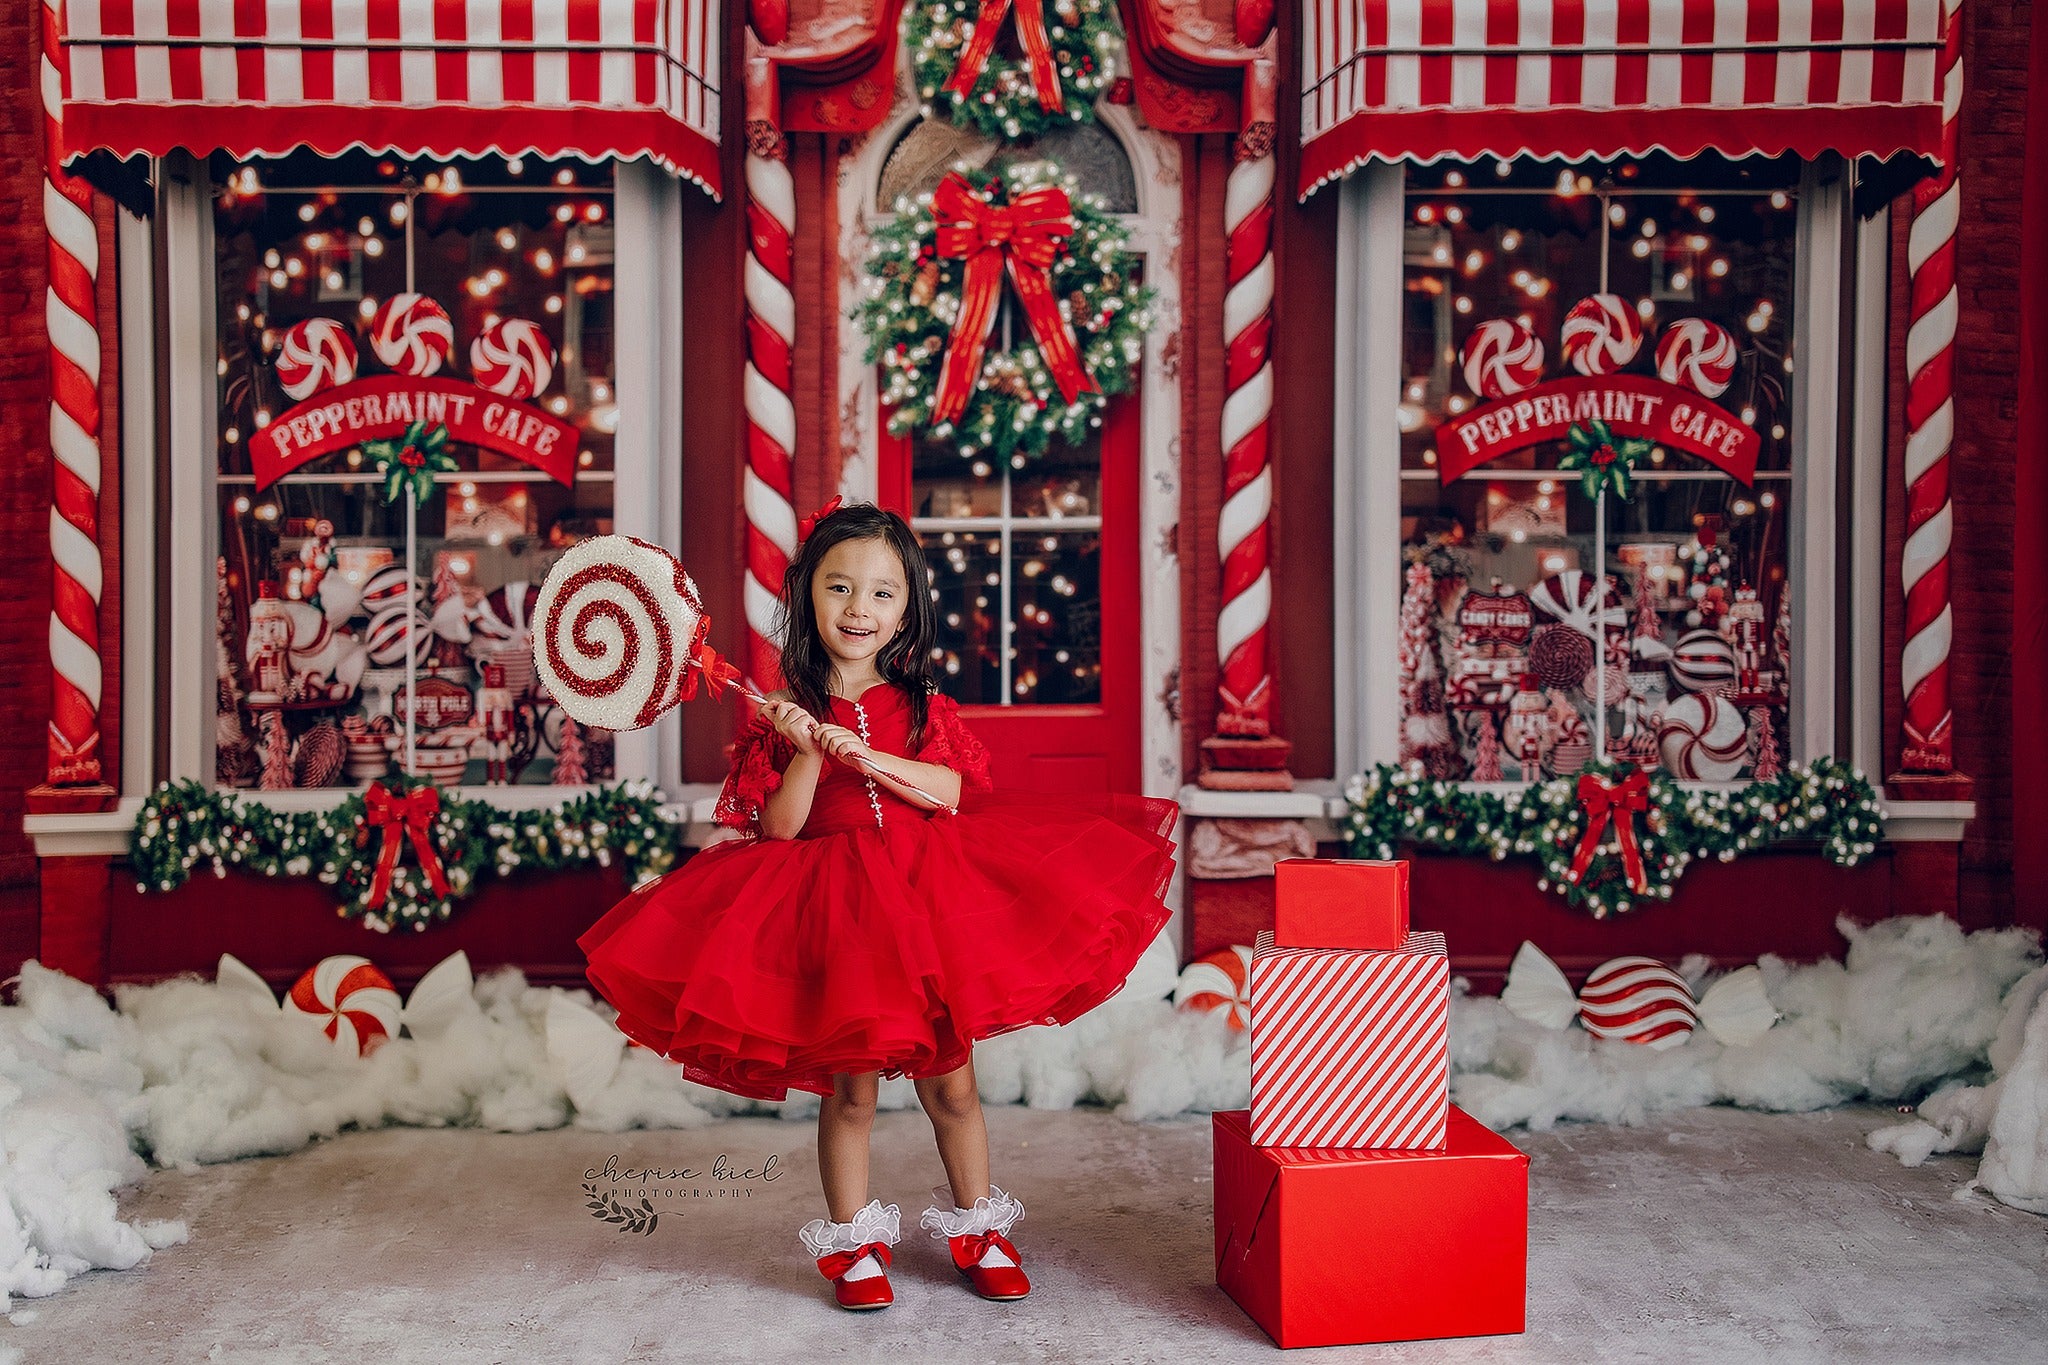 Rental gowns for christmas sessions, red gowns, holiday gowns, dream dress sessions, photography christmas sessions, gowns for photography. children's rental gowns, Red Christmas gown, princess inspired dress